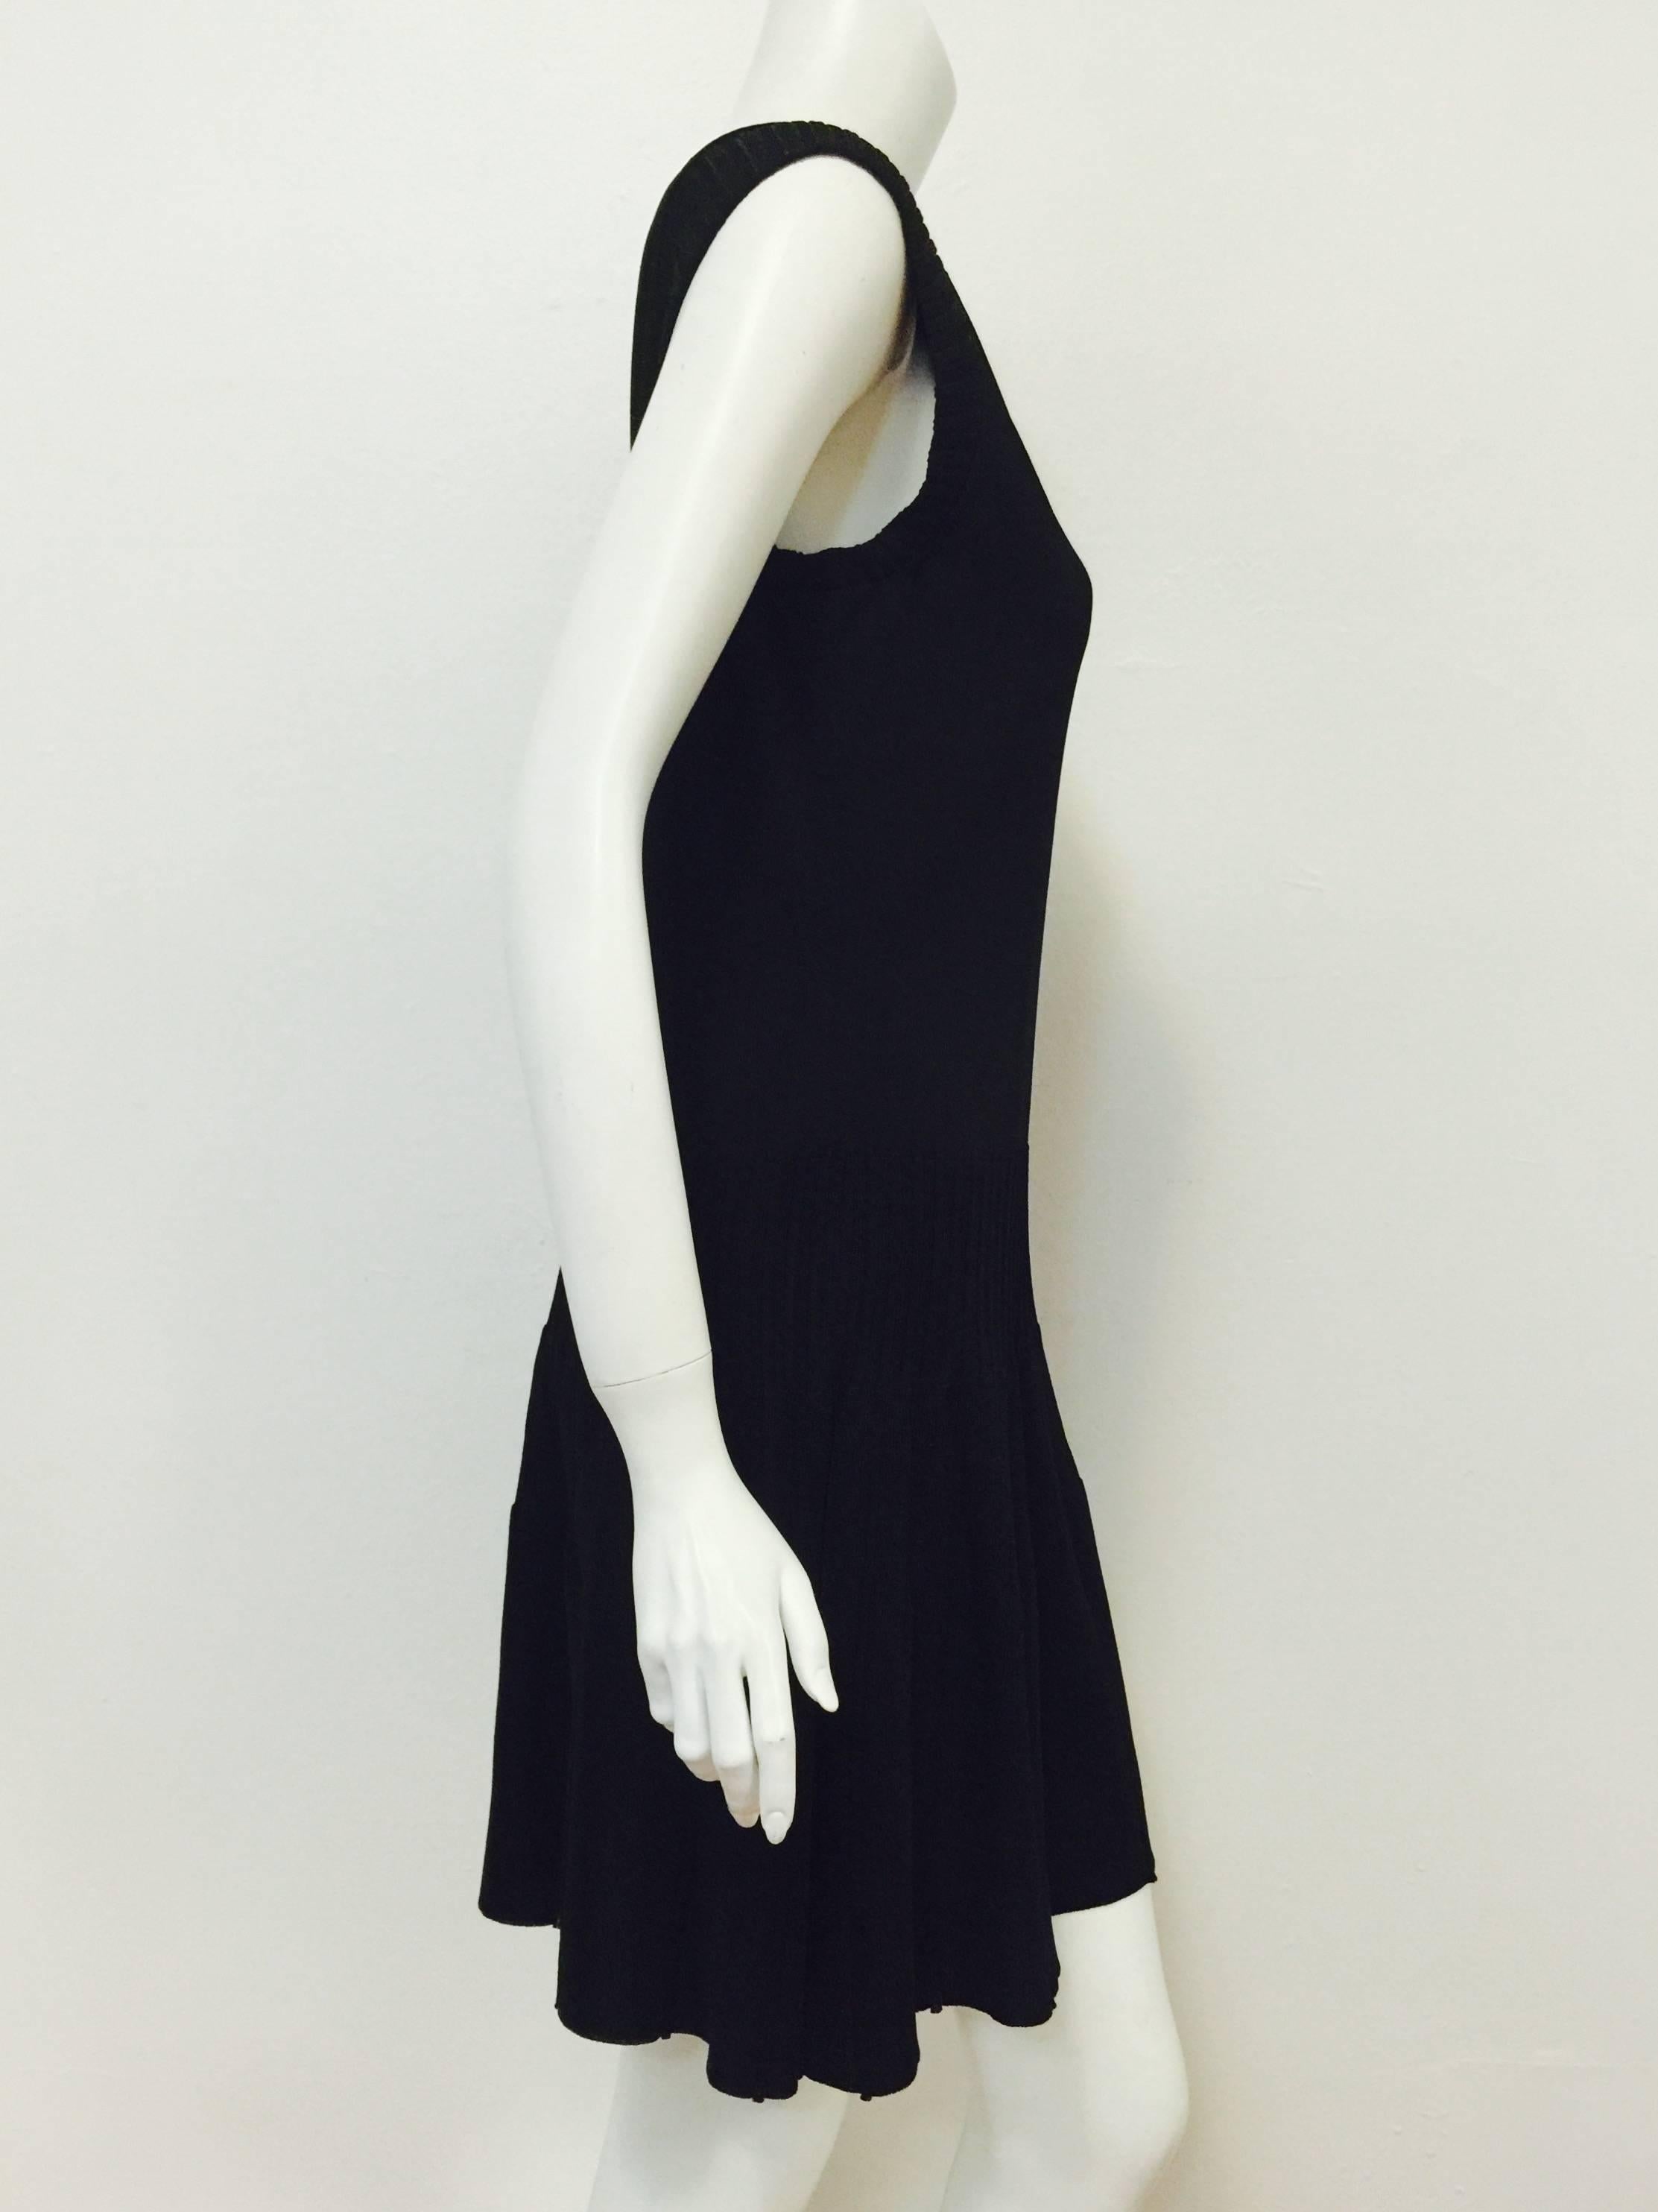 Chanel Black Knit Sleeveless Dress shows that one can not have too many 